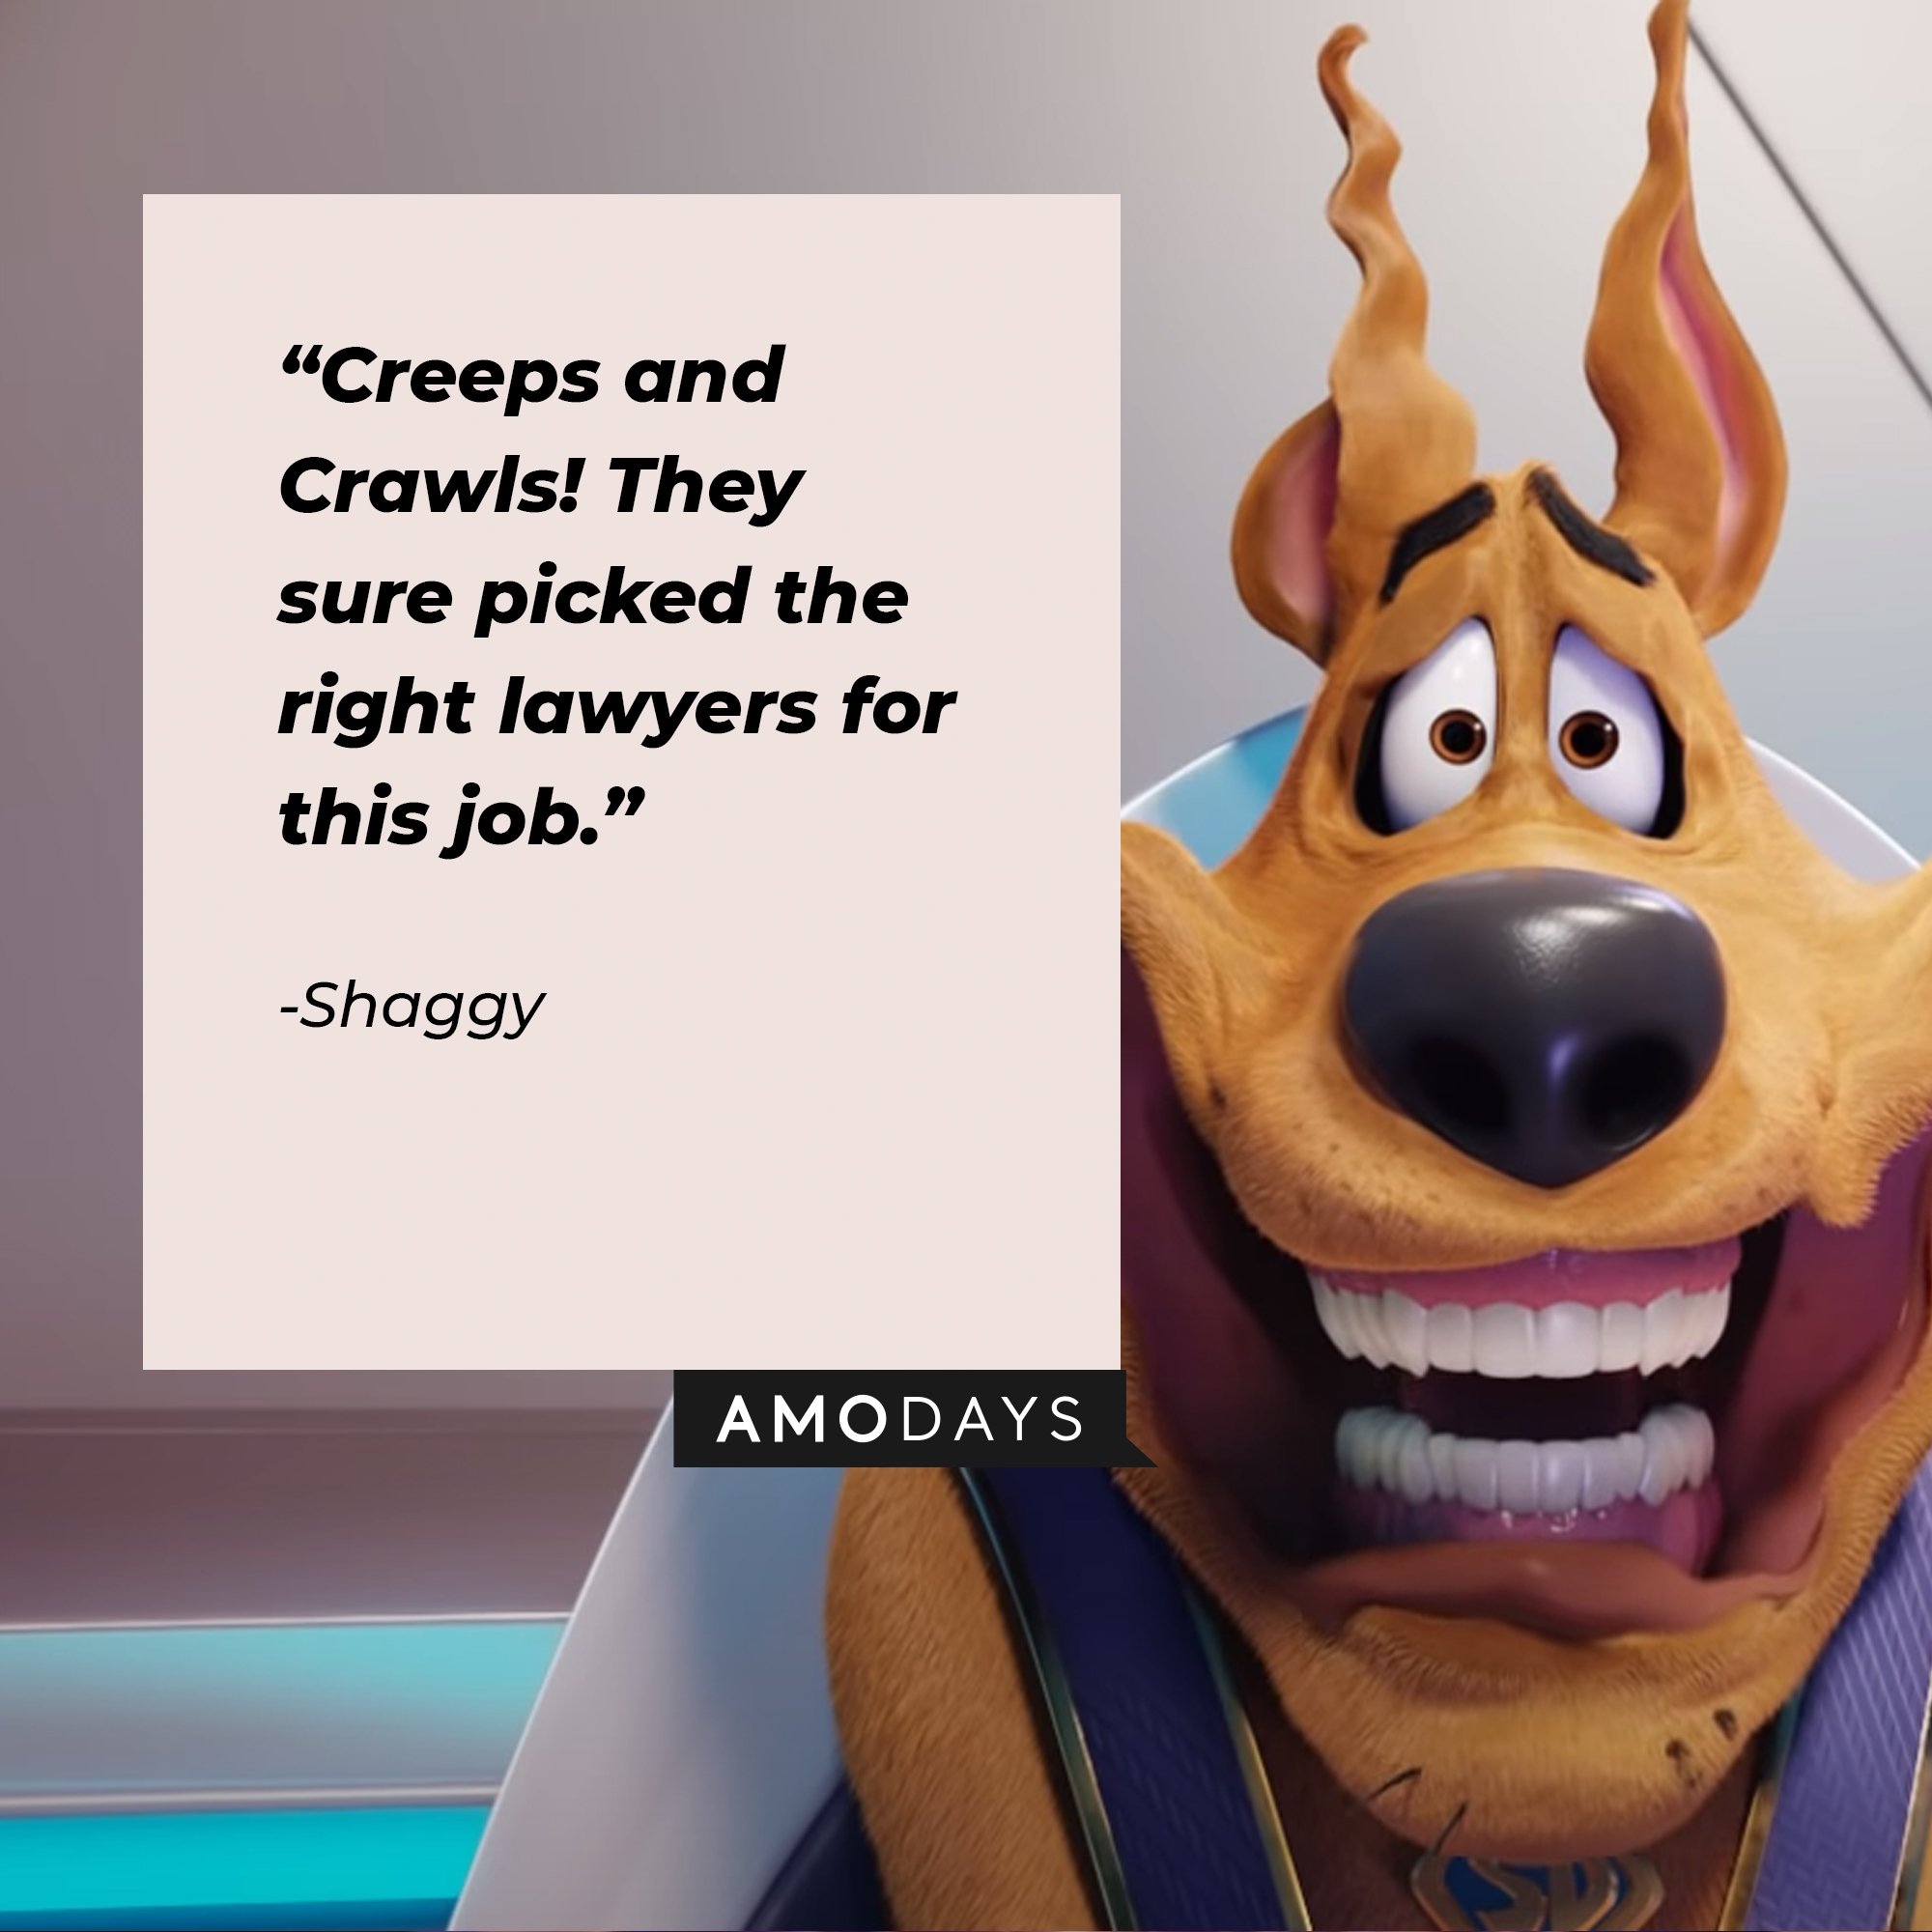 Shaggy's quote: “Creeps and Crawls! They sure picked the right lawyers for this job.” | Image: AmoDays